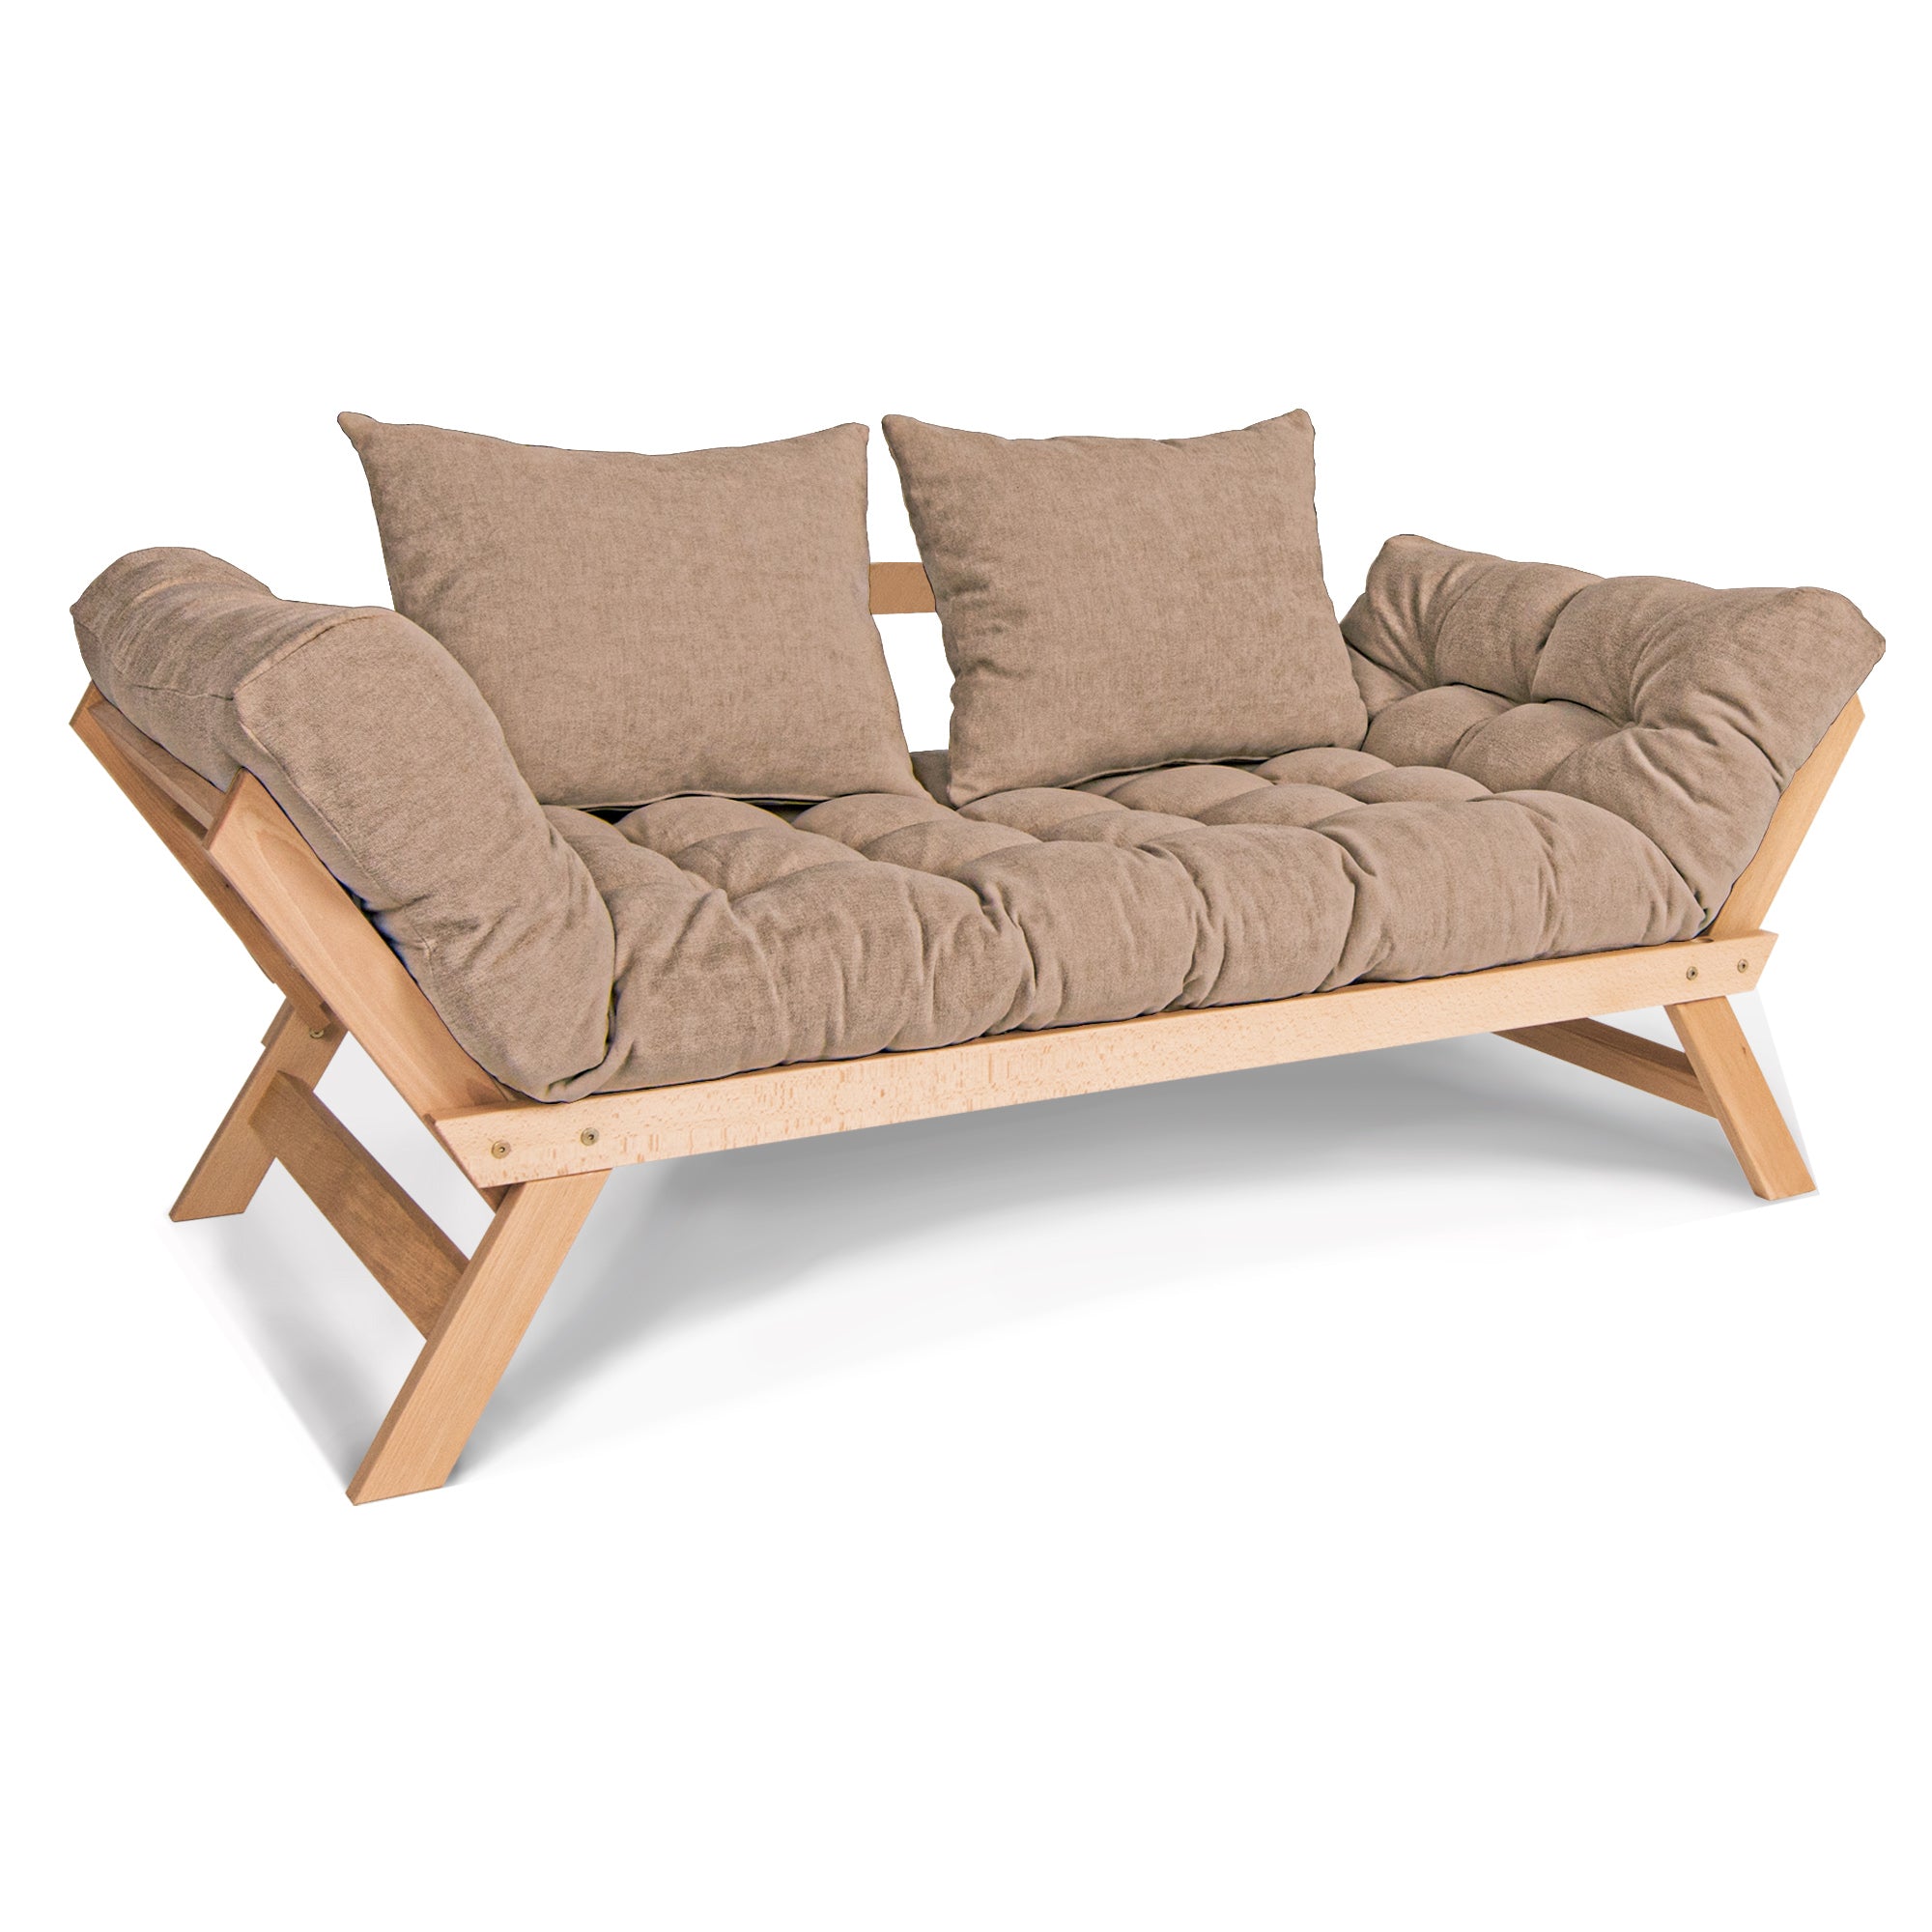 ALLEGRO Folding Sofa Bed, Beech Wood Frame, Natural Colour upholstery colour  beige